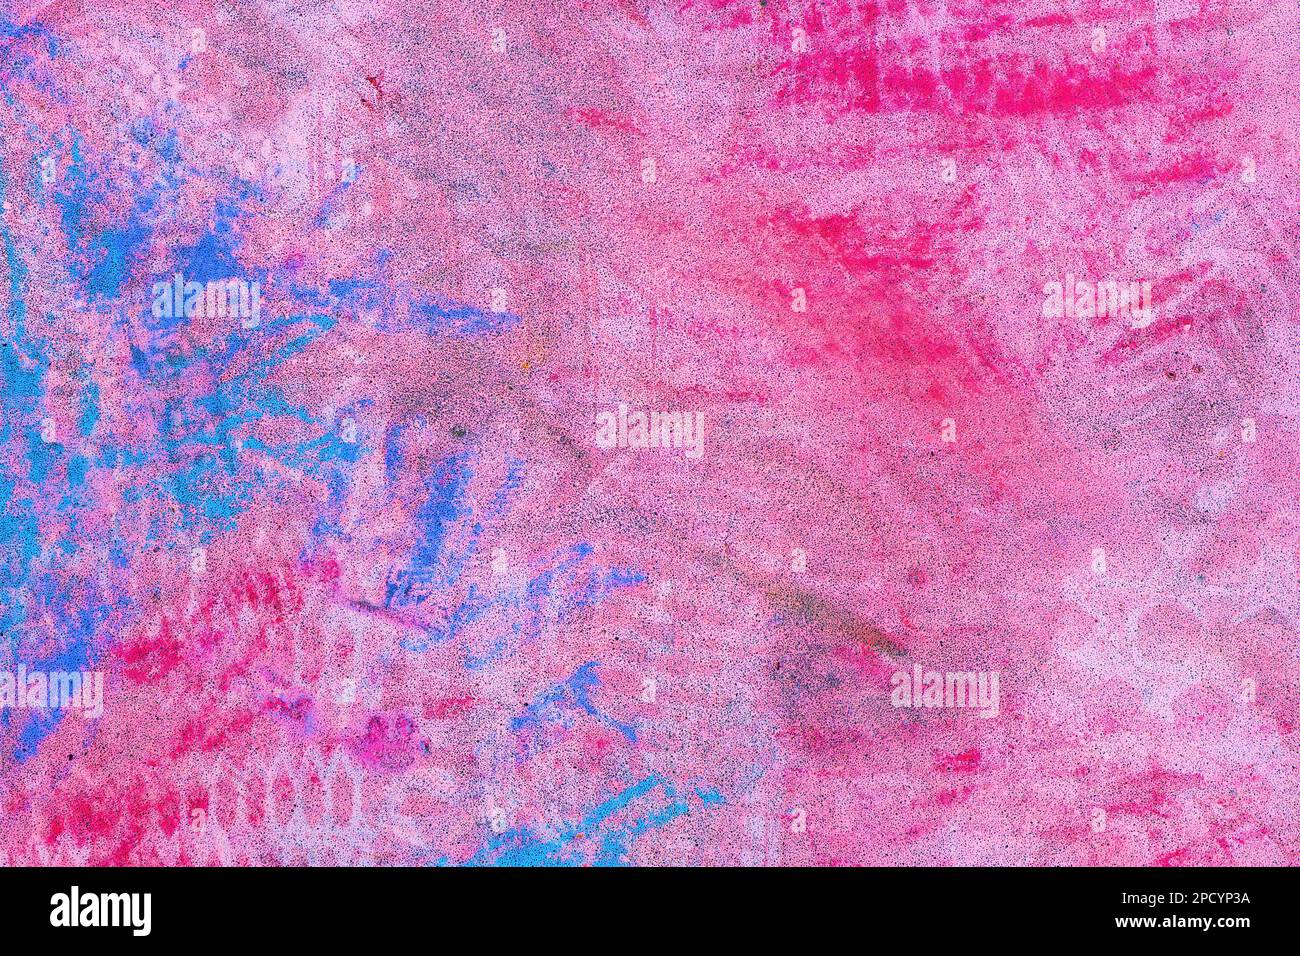 Grunge texture, pink and blue colorful chalk on concrete surface Stock Photo